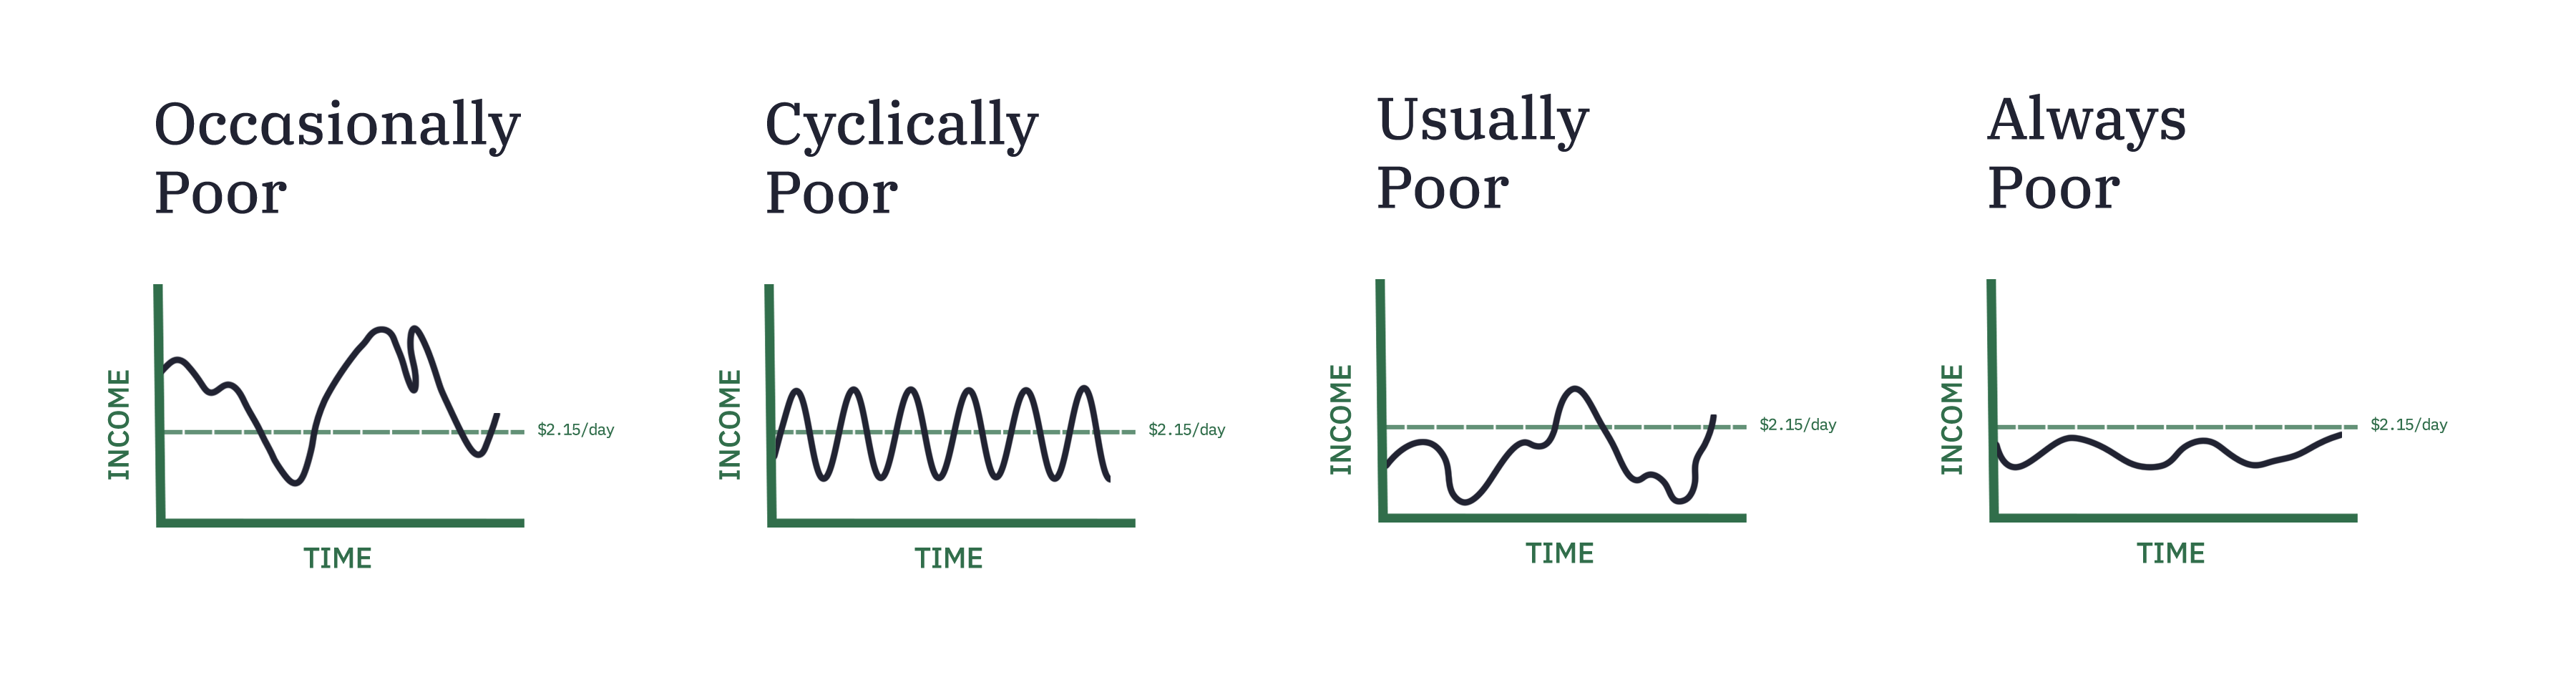 Charts showing four types of poverty: Occasionally Poor, Cyclically Poor, Usually Poor, and Always Poor. This is based on the revised poverty line of $2.15 a day.